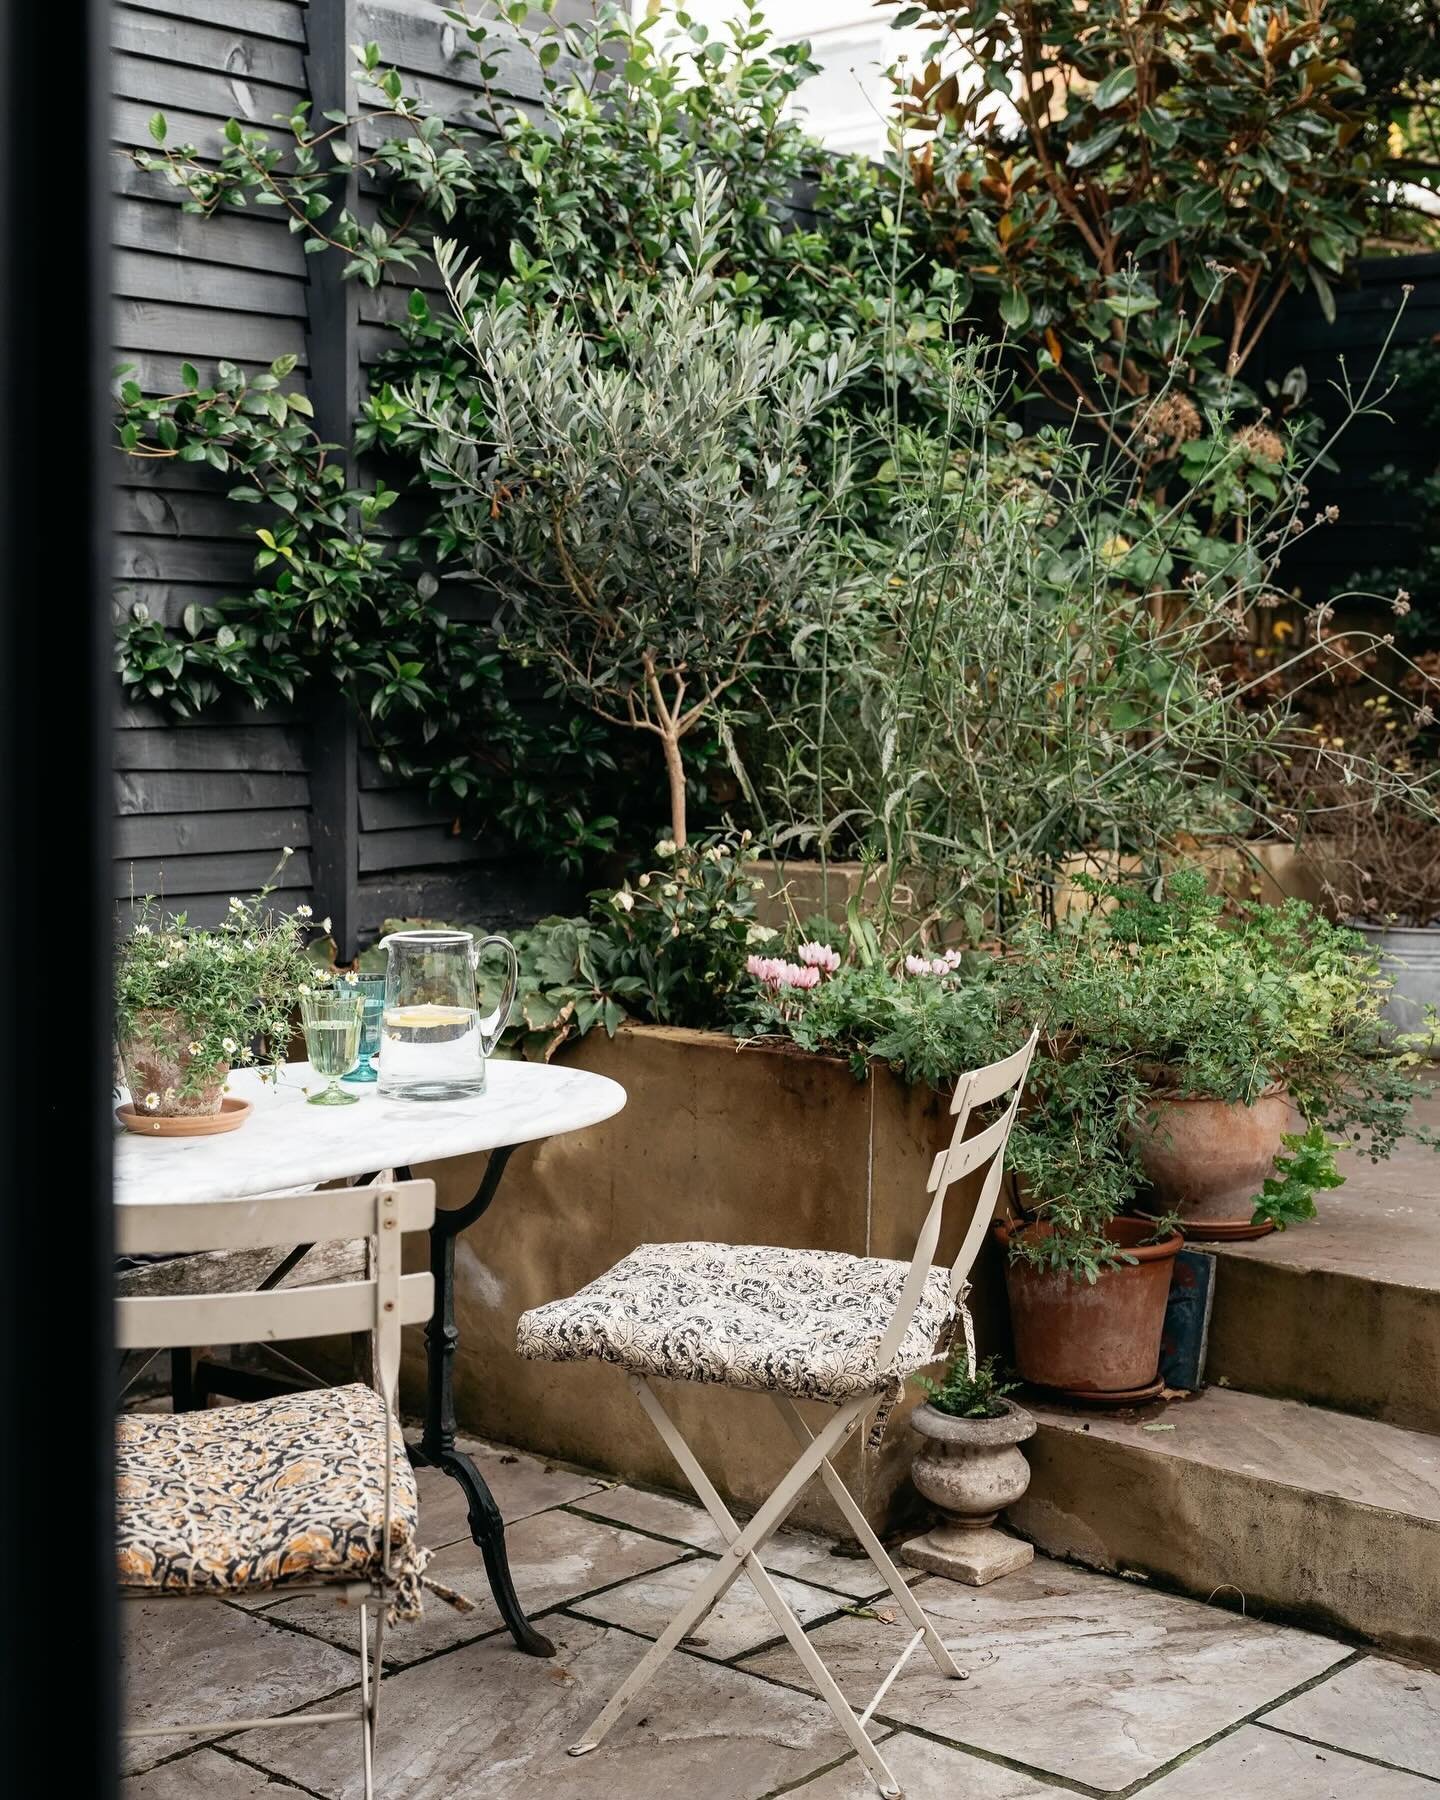 As spring springs and we spend more time outside, we caught up with Ben Skinner and Andrew Eden from @townandcountrygardensltd to find out what London buyers are looking for in gardens and some top tips you can follow to get your garden ready for sal